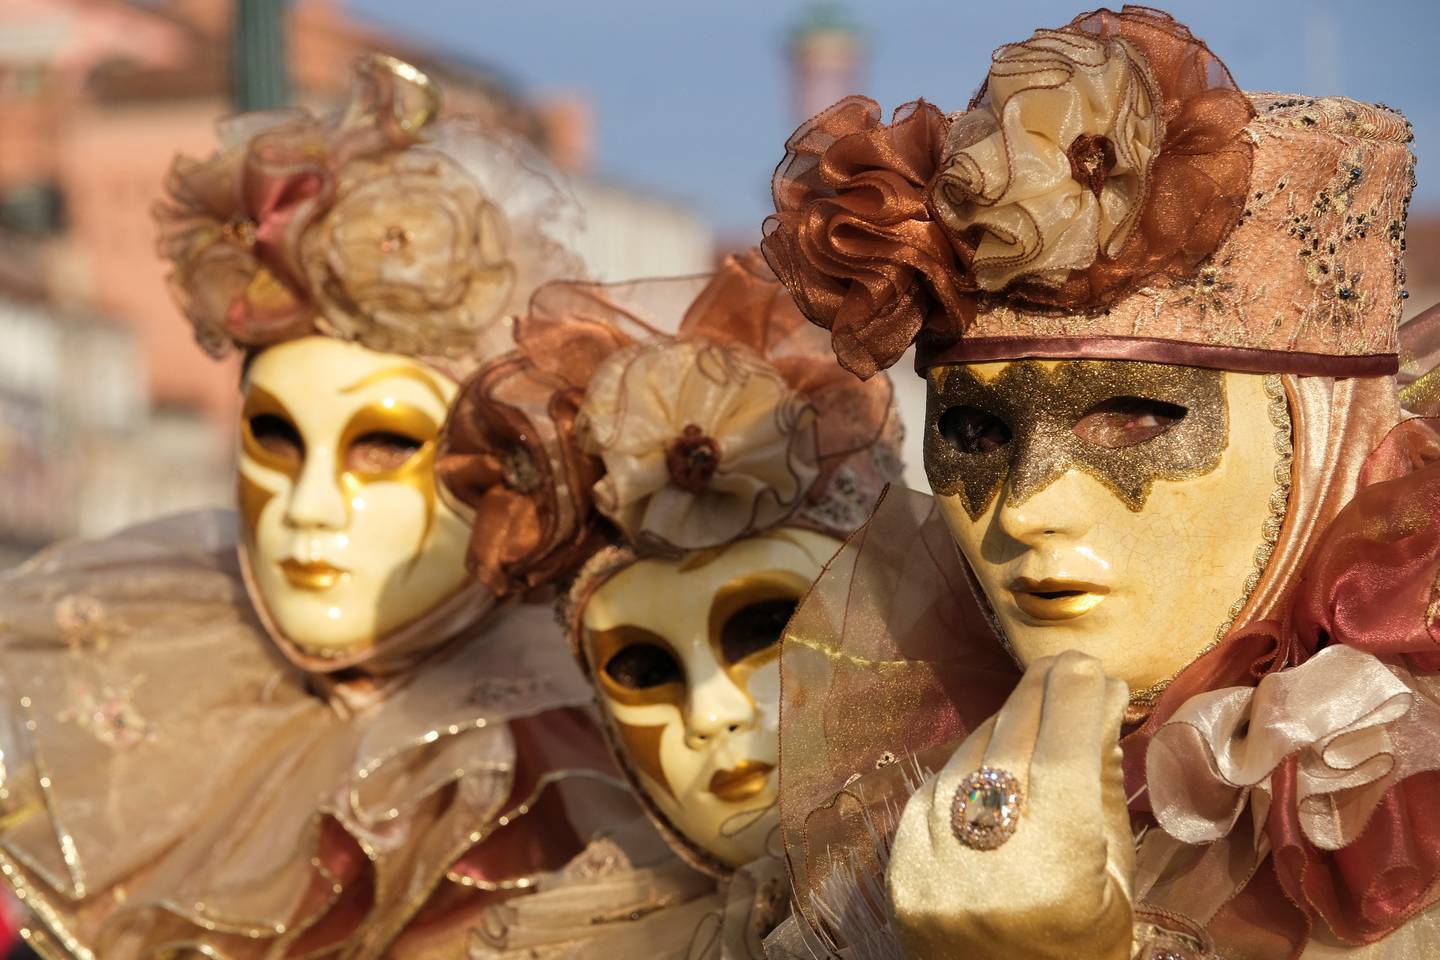 Masked revellers gather in Piazza San Marco to celebrate Venice carnival. Reuters